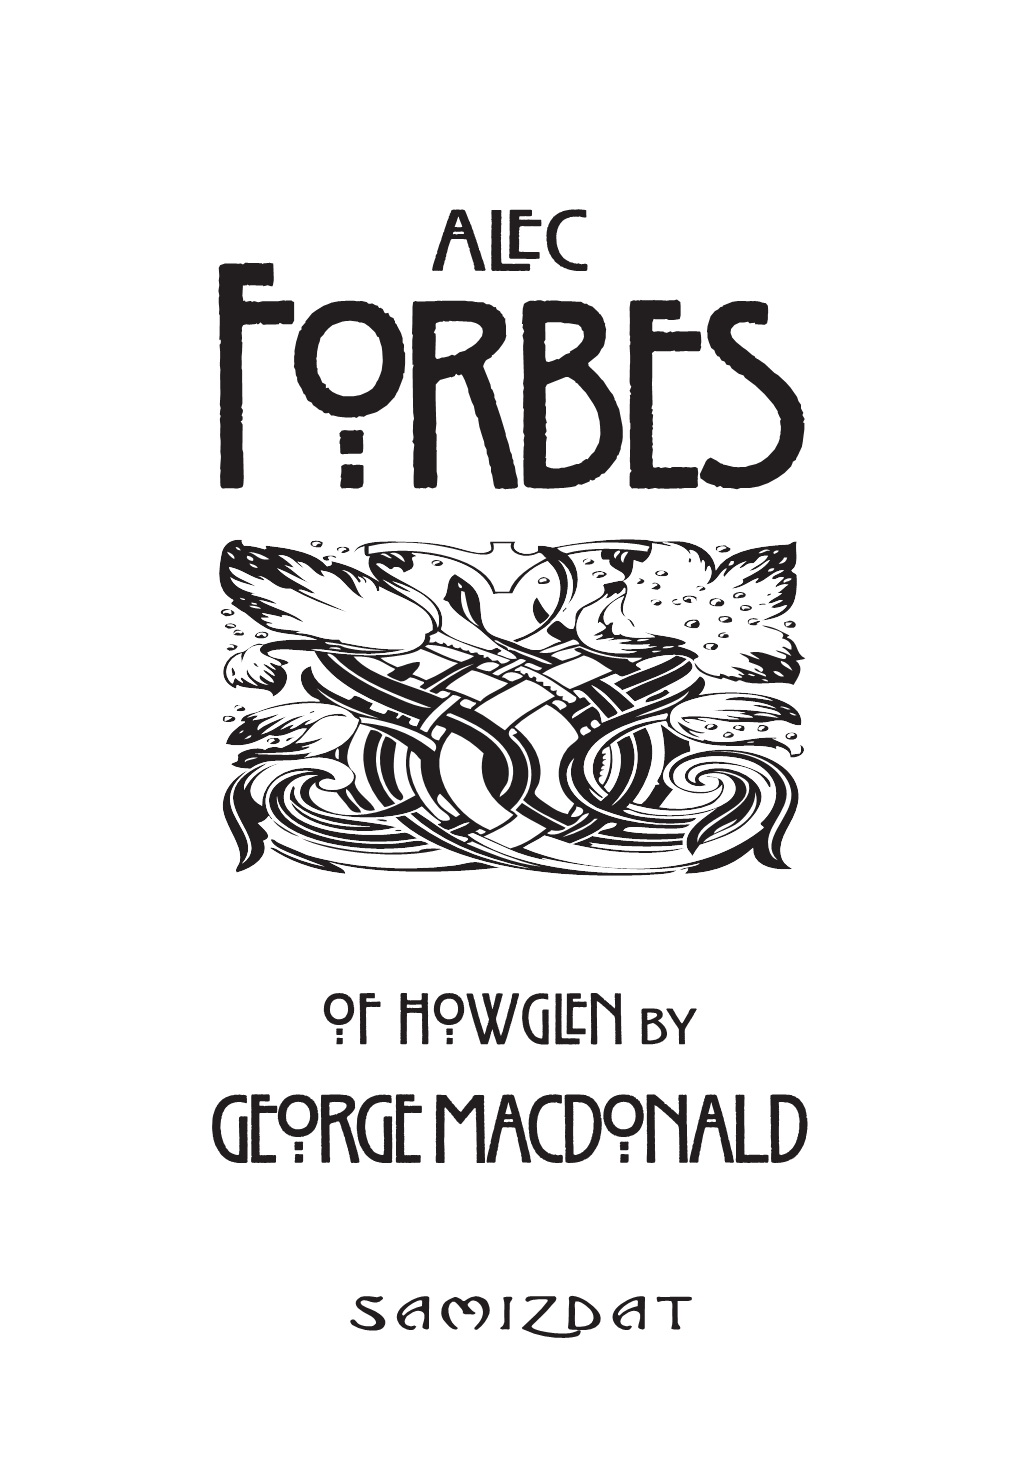 Alec Forbes of Howglen by George Macdonald (1824-1905) Was Originally Published in 1865